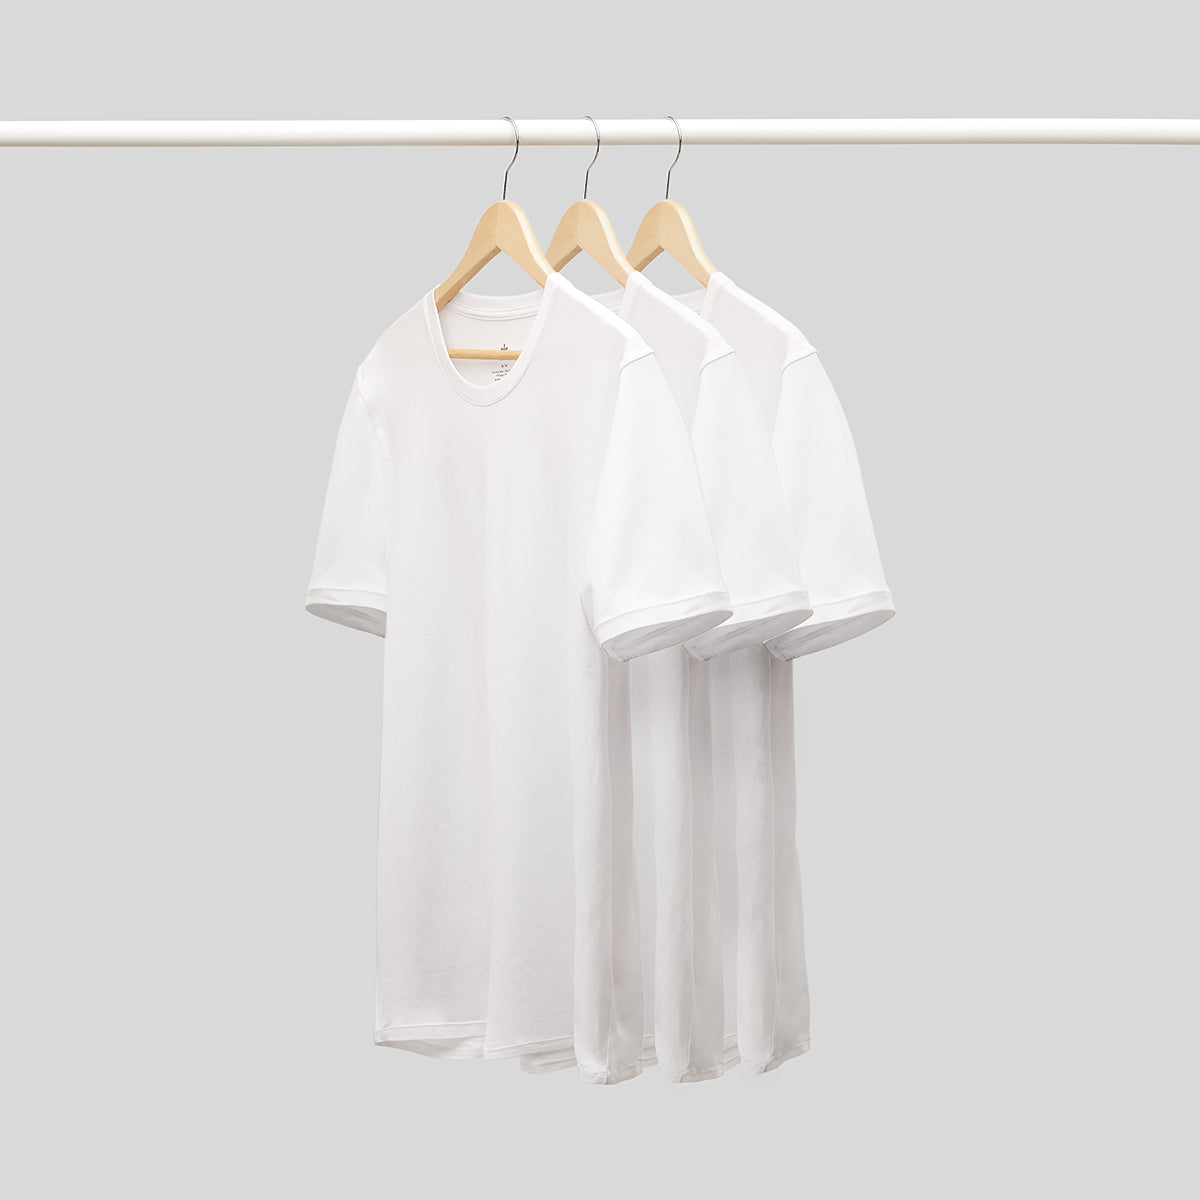 Pack of 3 White T-Shirts